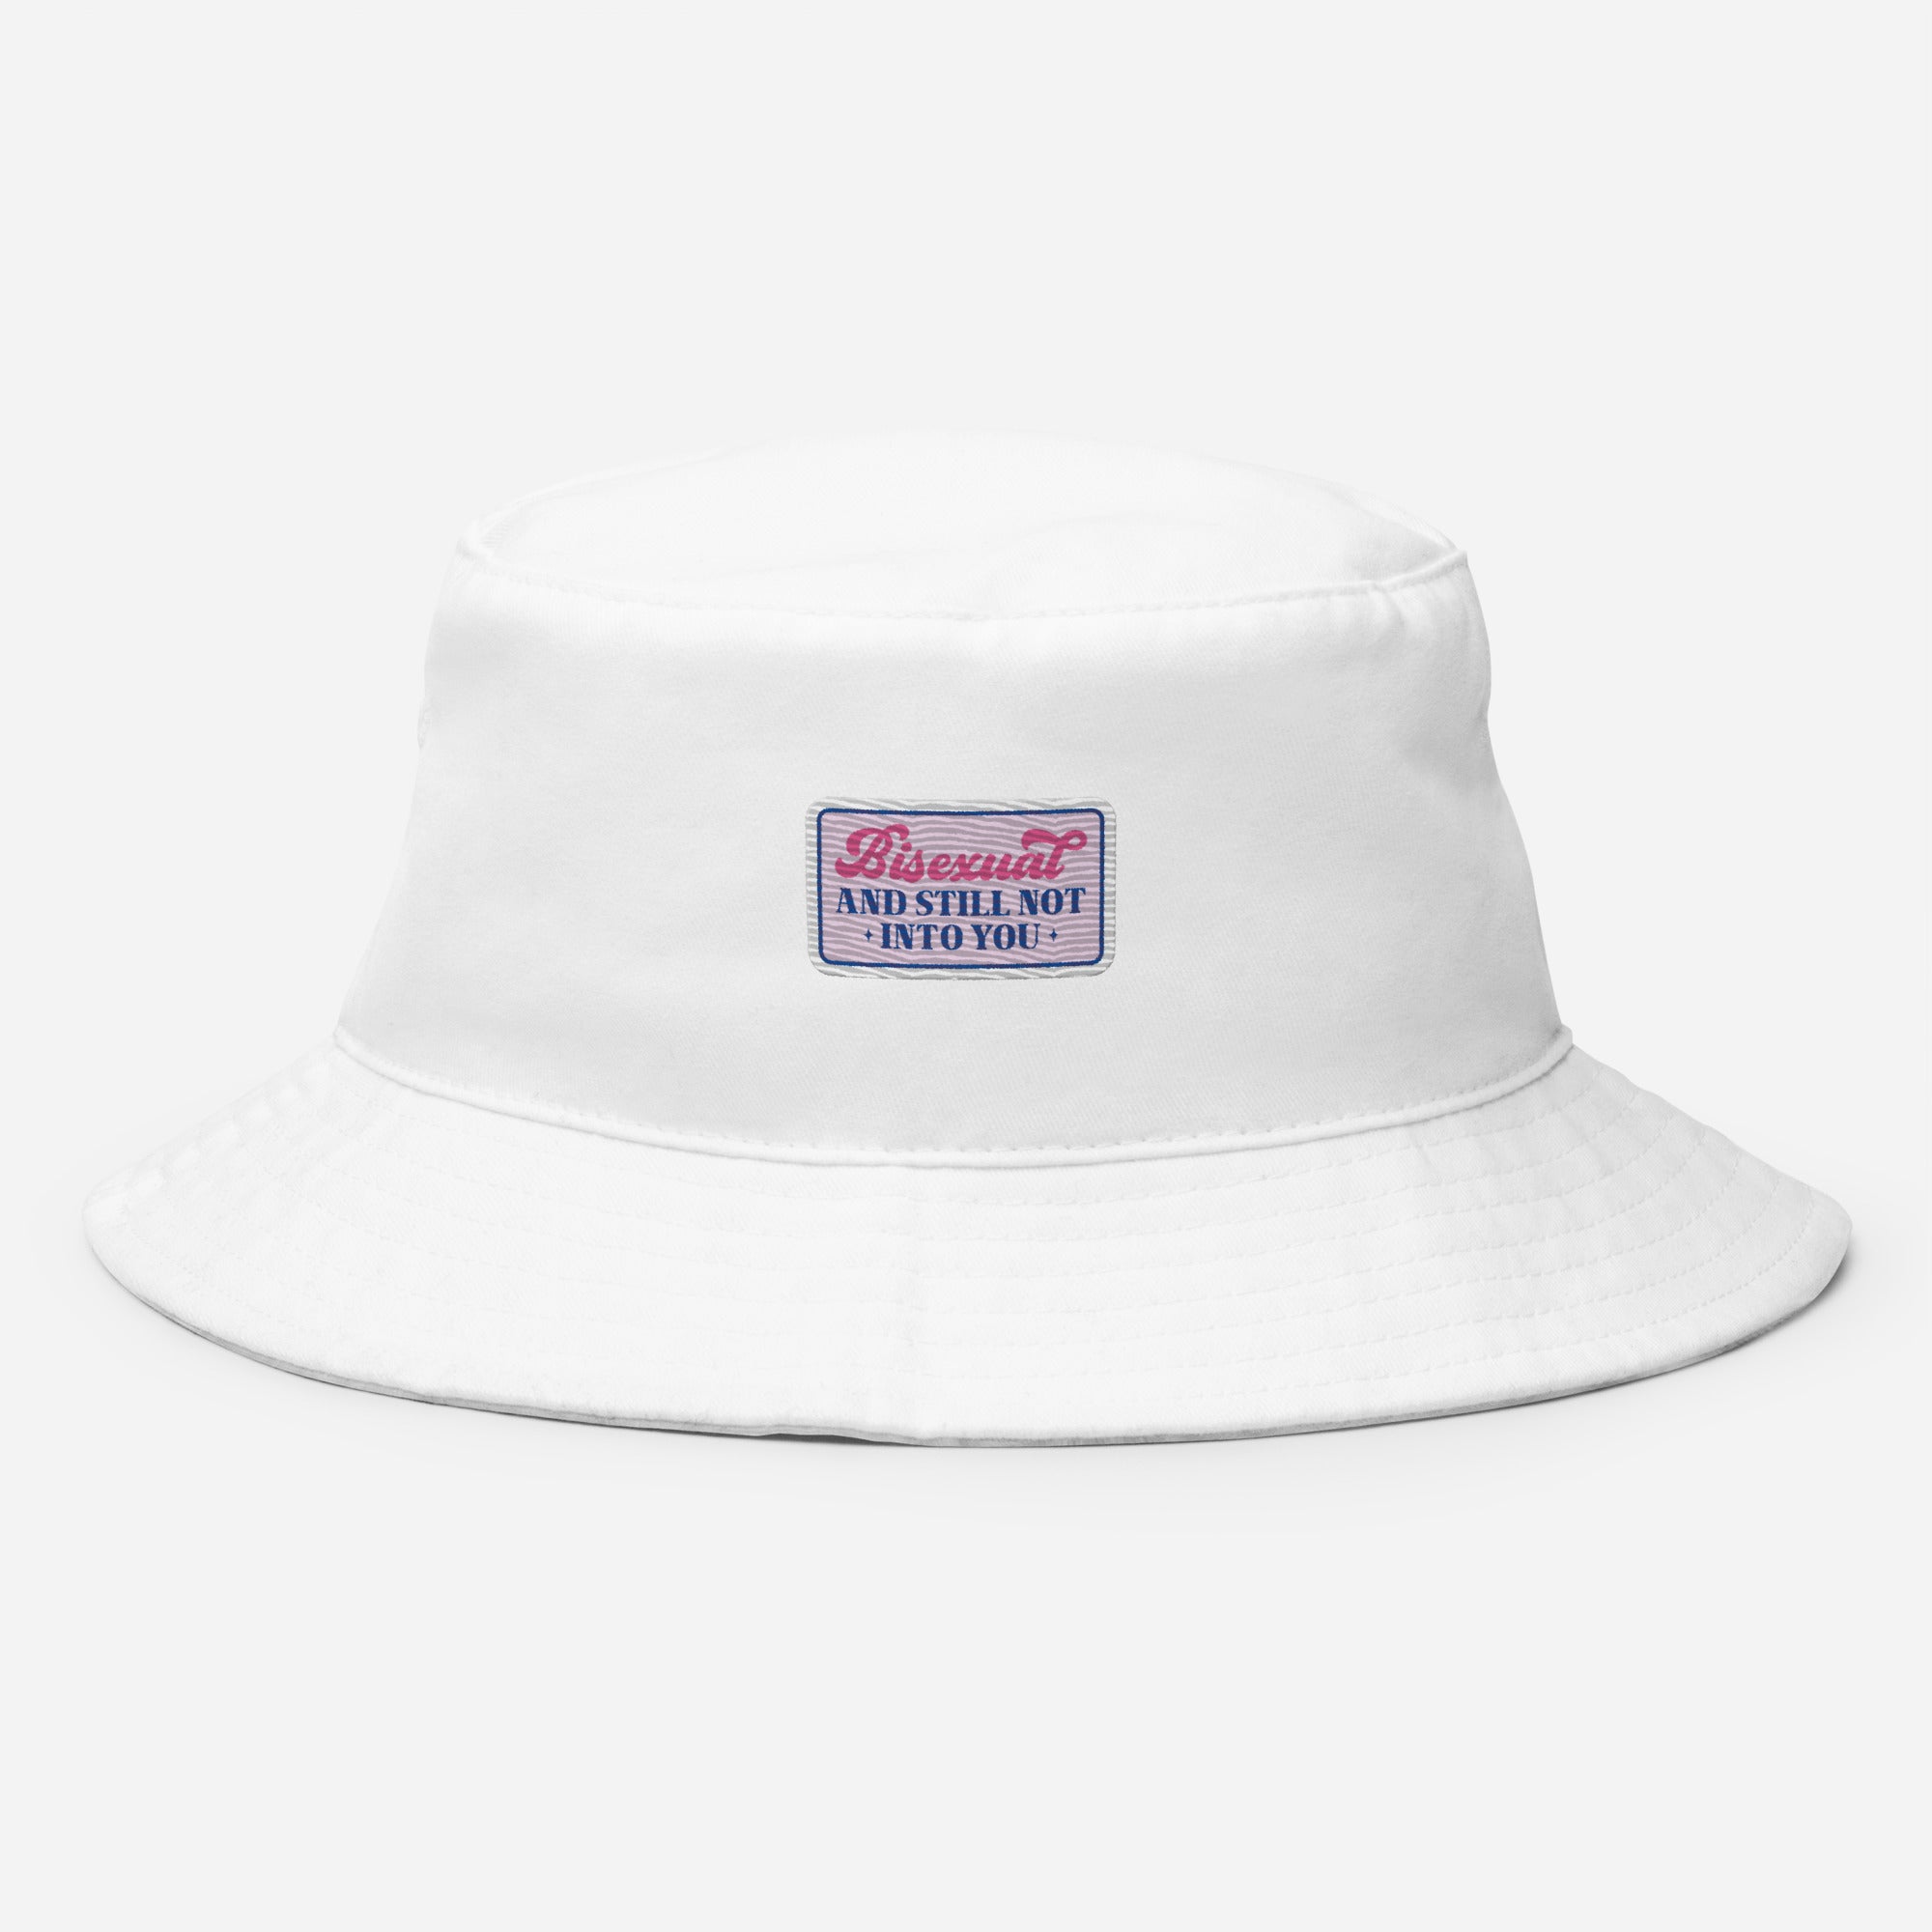 Bisexual AND STILL NOT INTO YOU Premium Embriodered Bucket Hat